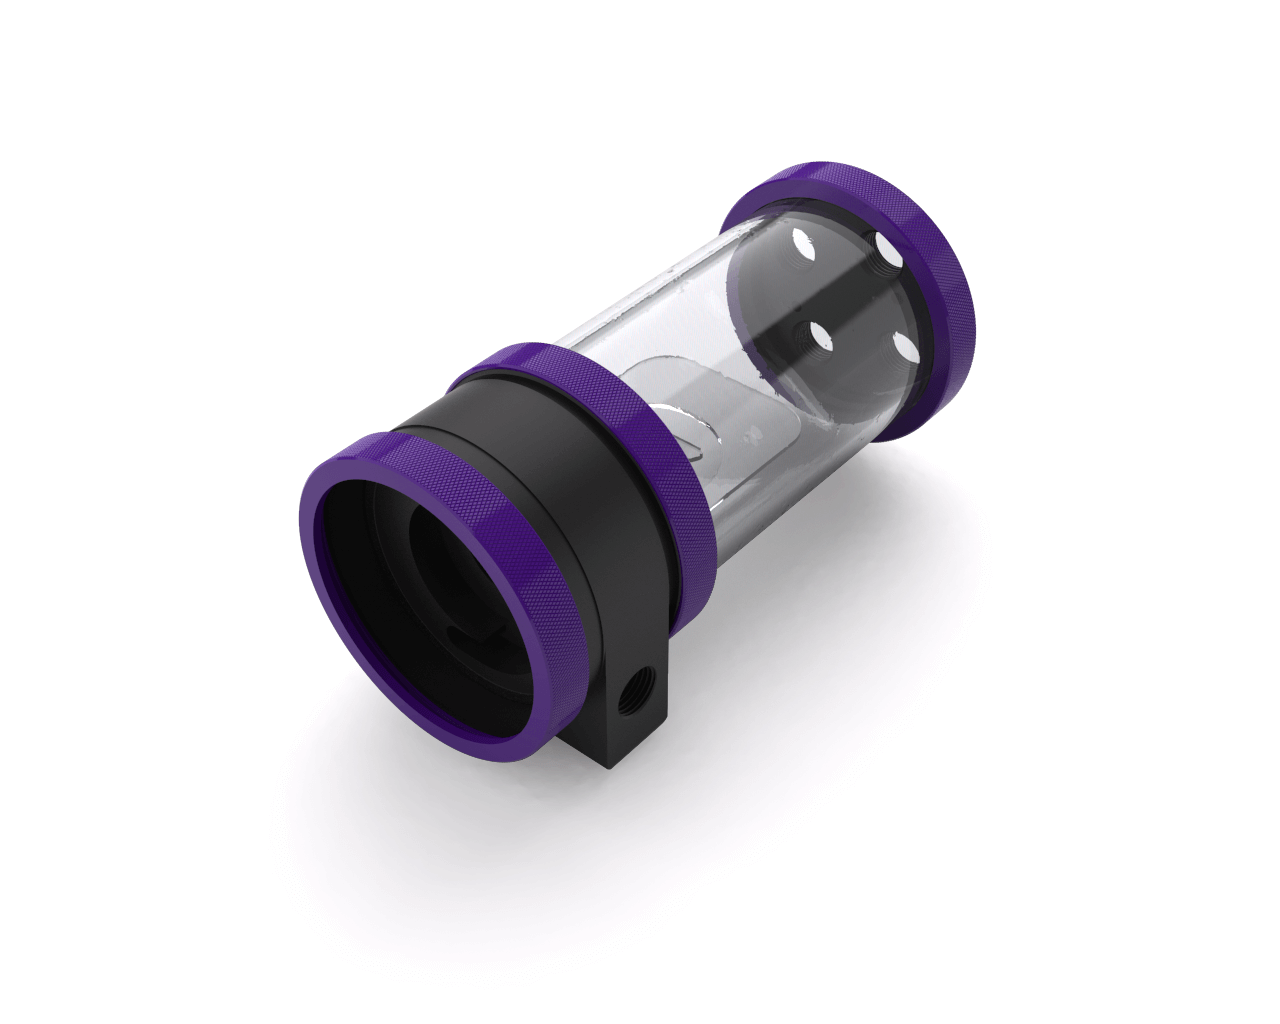 PrimoChill CTR SFF Phase II High Flow D5 Enabled Reservoir System - Black POM - 120mm - PrimoChill - KEEPING IT COOL Purple